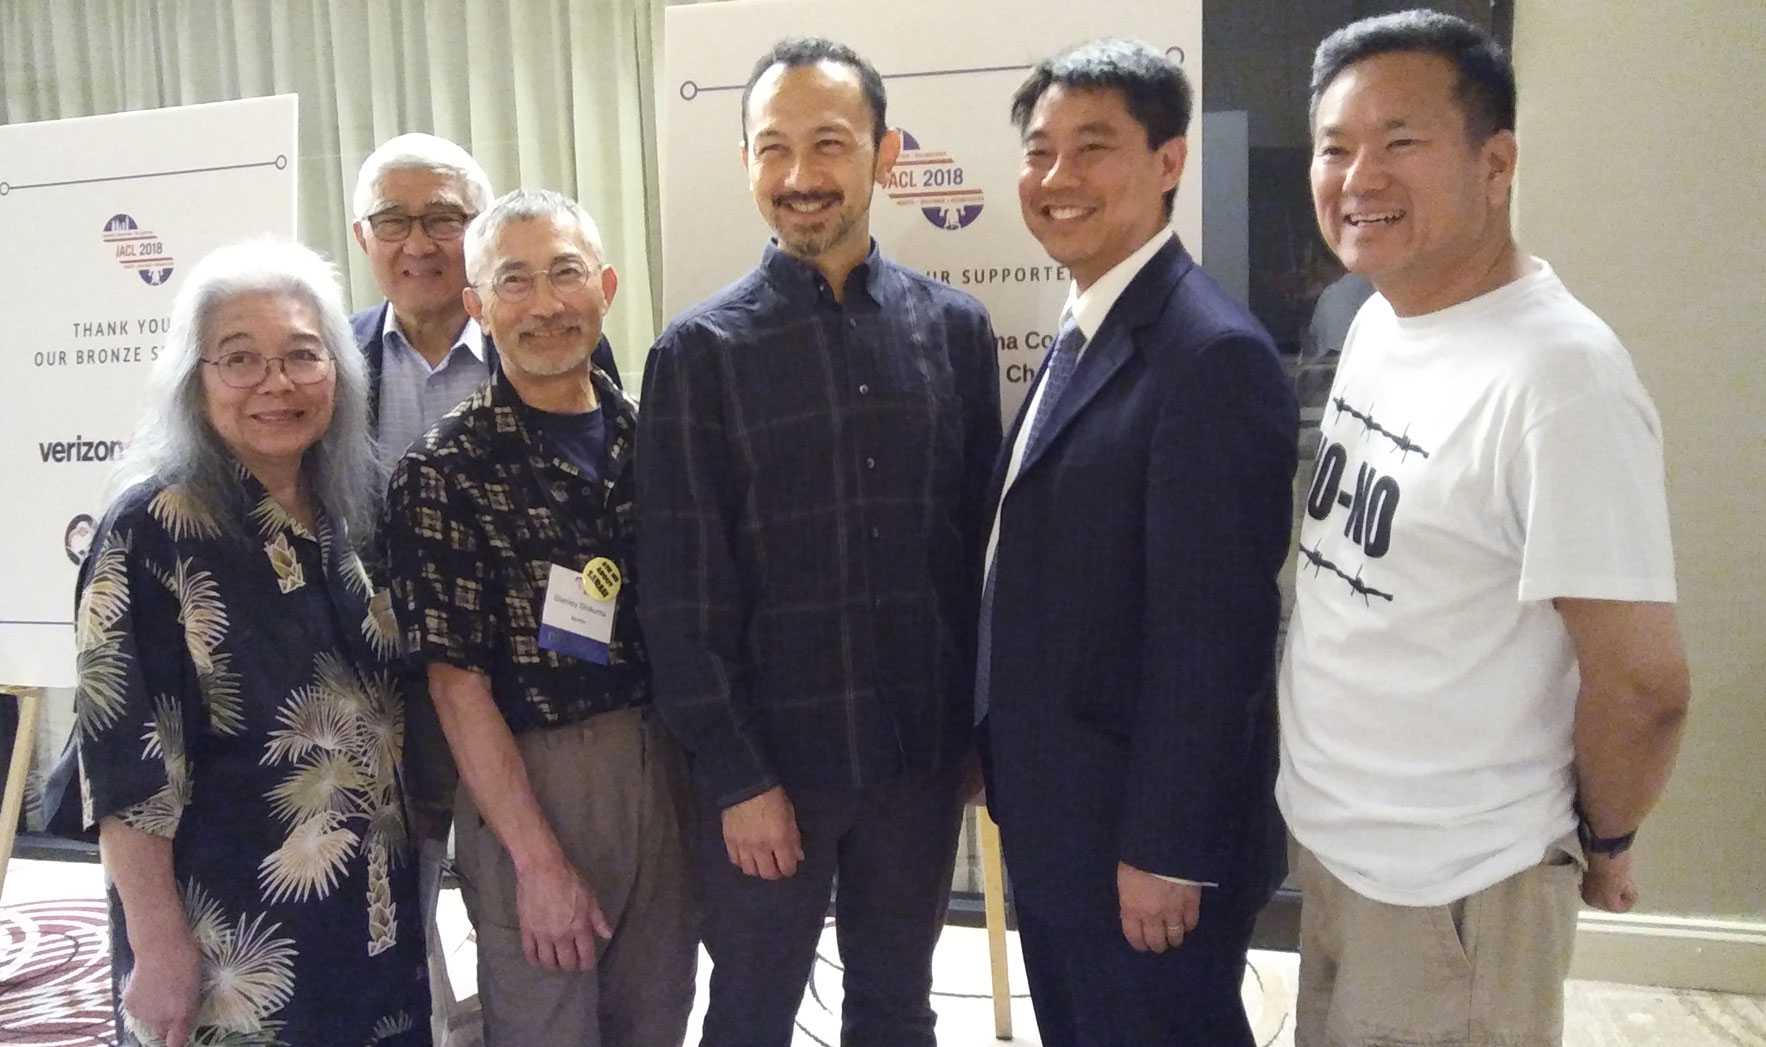 Screening at JACL 2018: Long Divided by “Loyalty,” Japanese American Community Becoming Whole